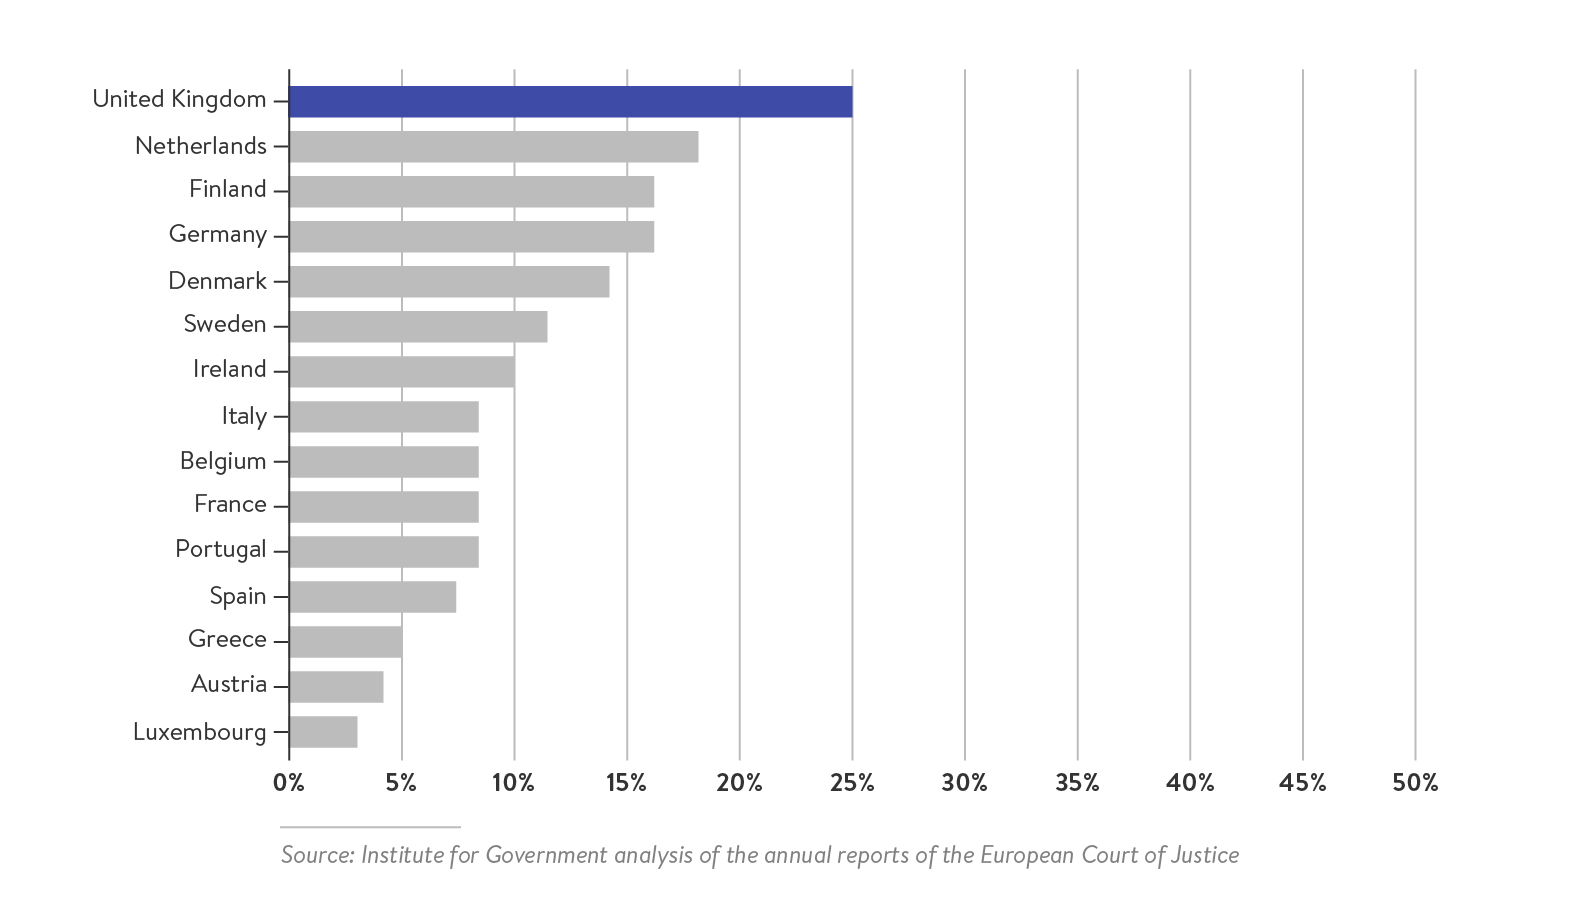 Figure 12: Favourable ECJ Judgements by Country, 2003–2016